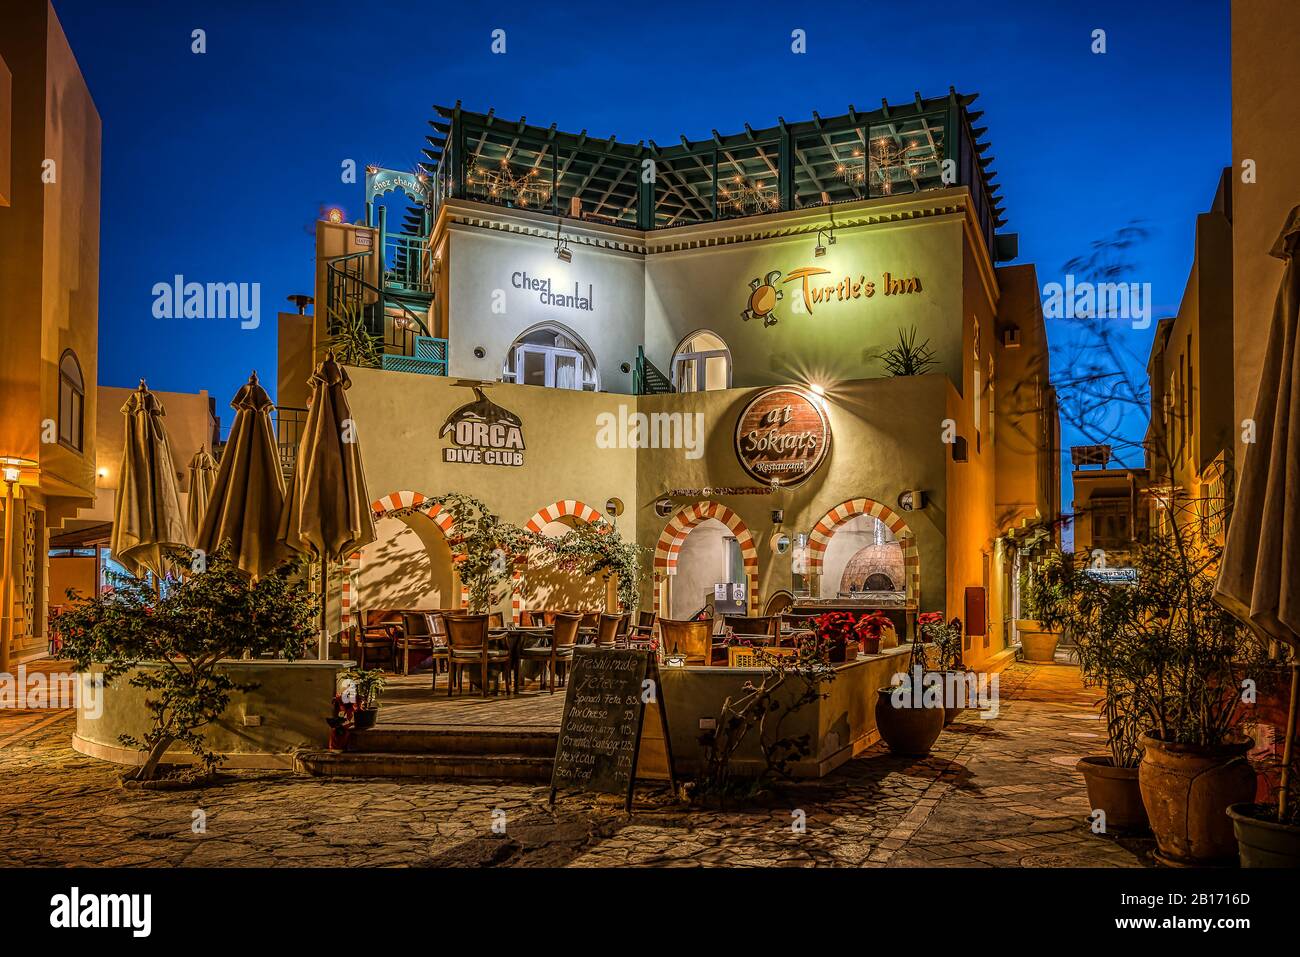 A colourful picturesque restaurant illuminated at night in the old town among narrow alleys, el Gouna, Egypt, January 17, 2020 Stock Photo